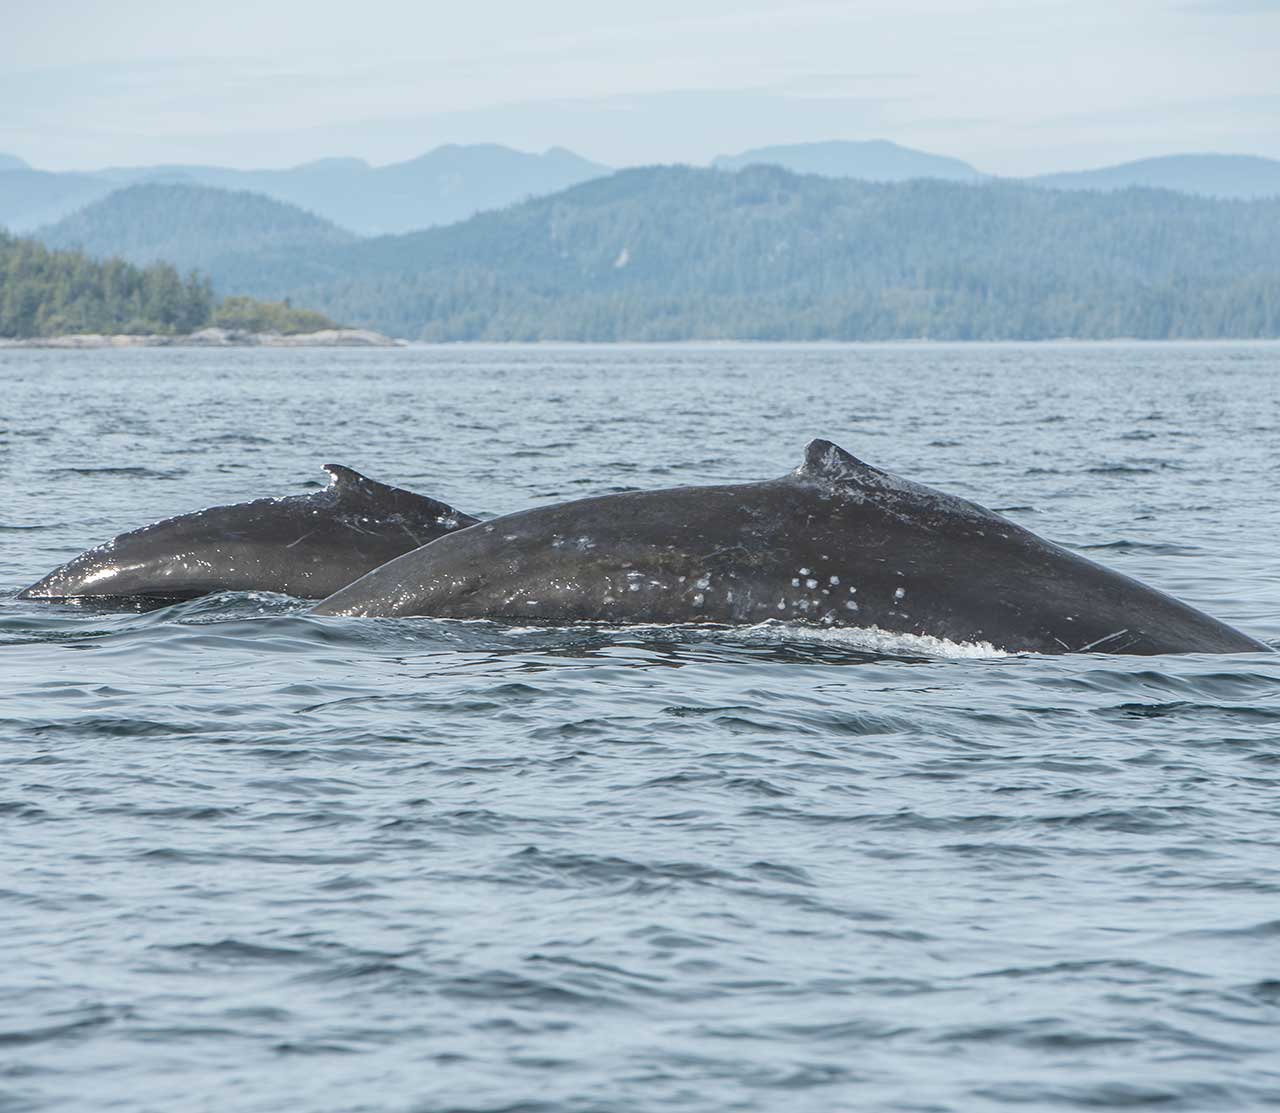 mers marine education research society whale nippy with her calf